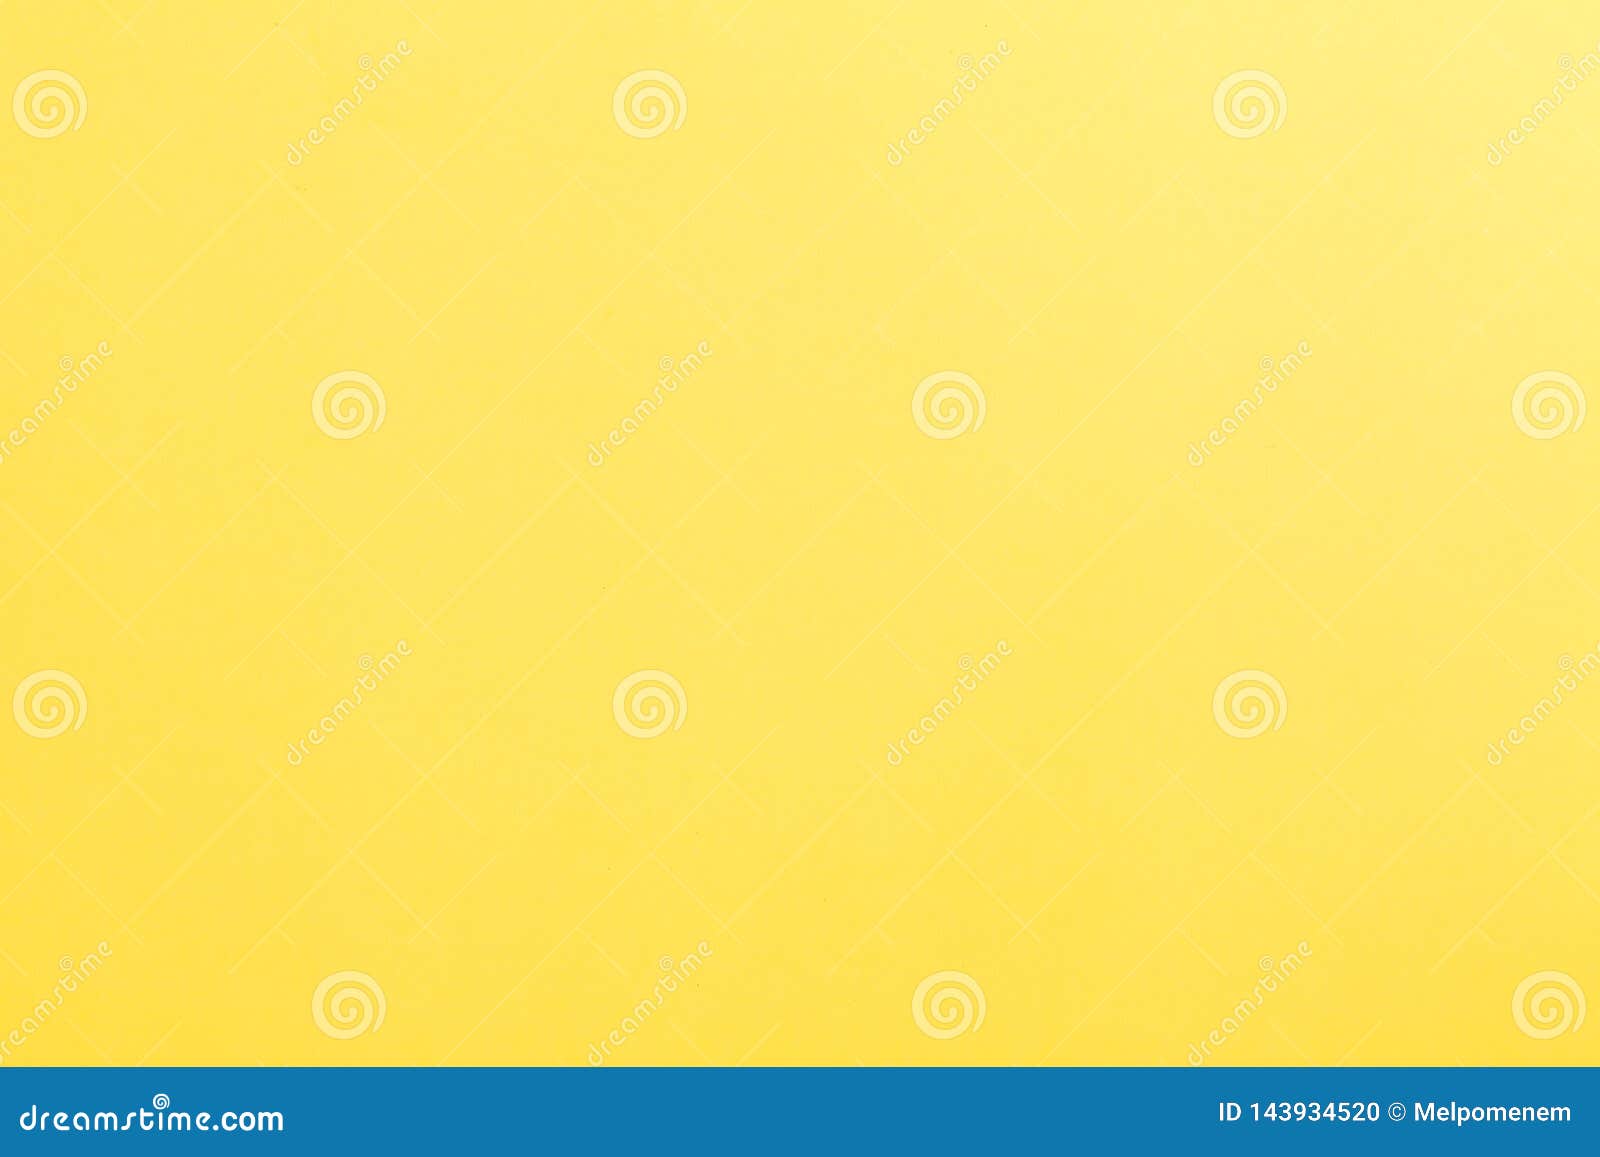 Abstract Blank Solid Color Background Stock Photo - Image of colorful,  bright: 143934520